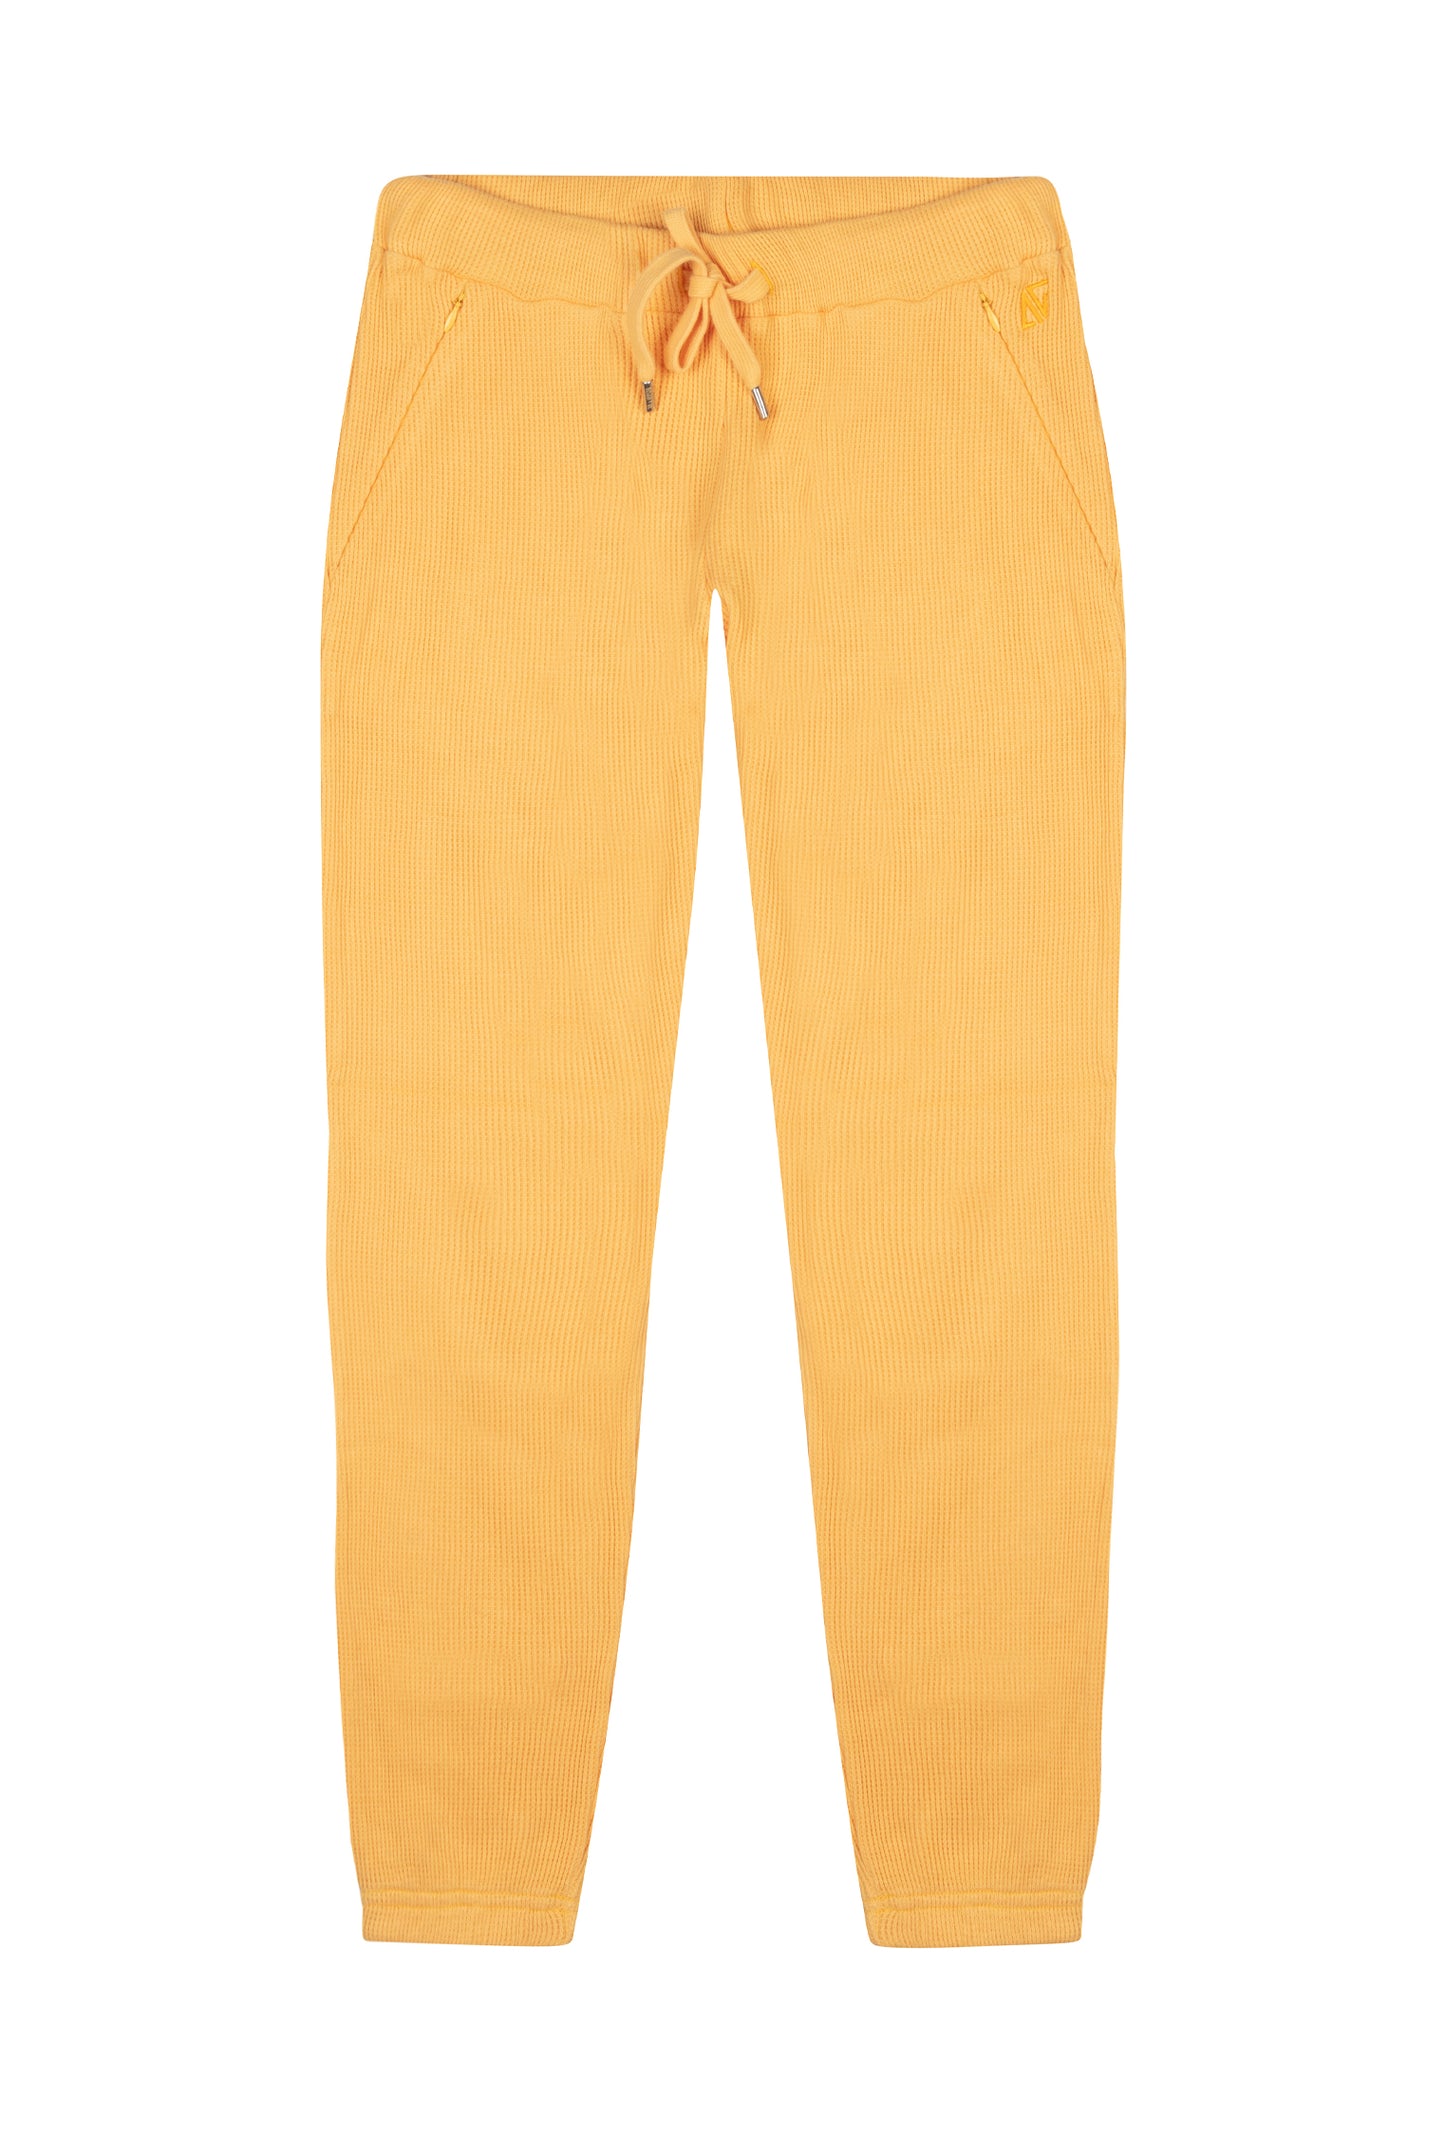 Load image into Gallery viewer, Waffle Sweatpants - Honeycomb
